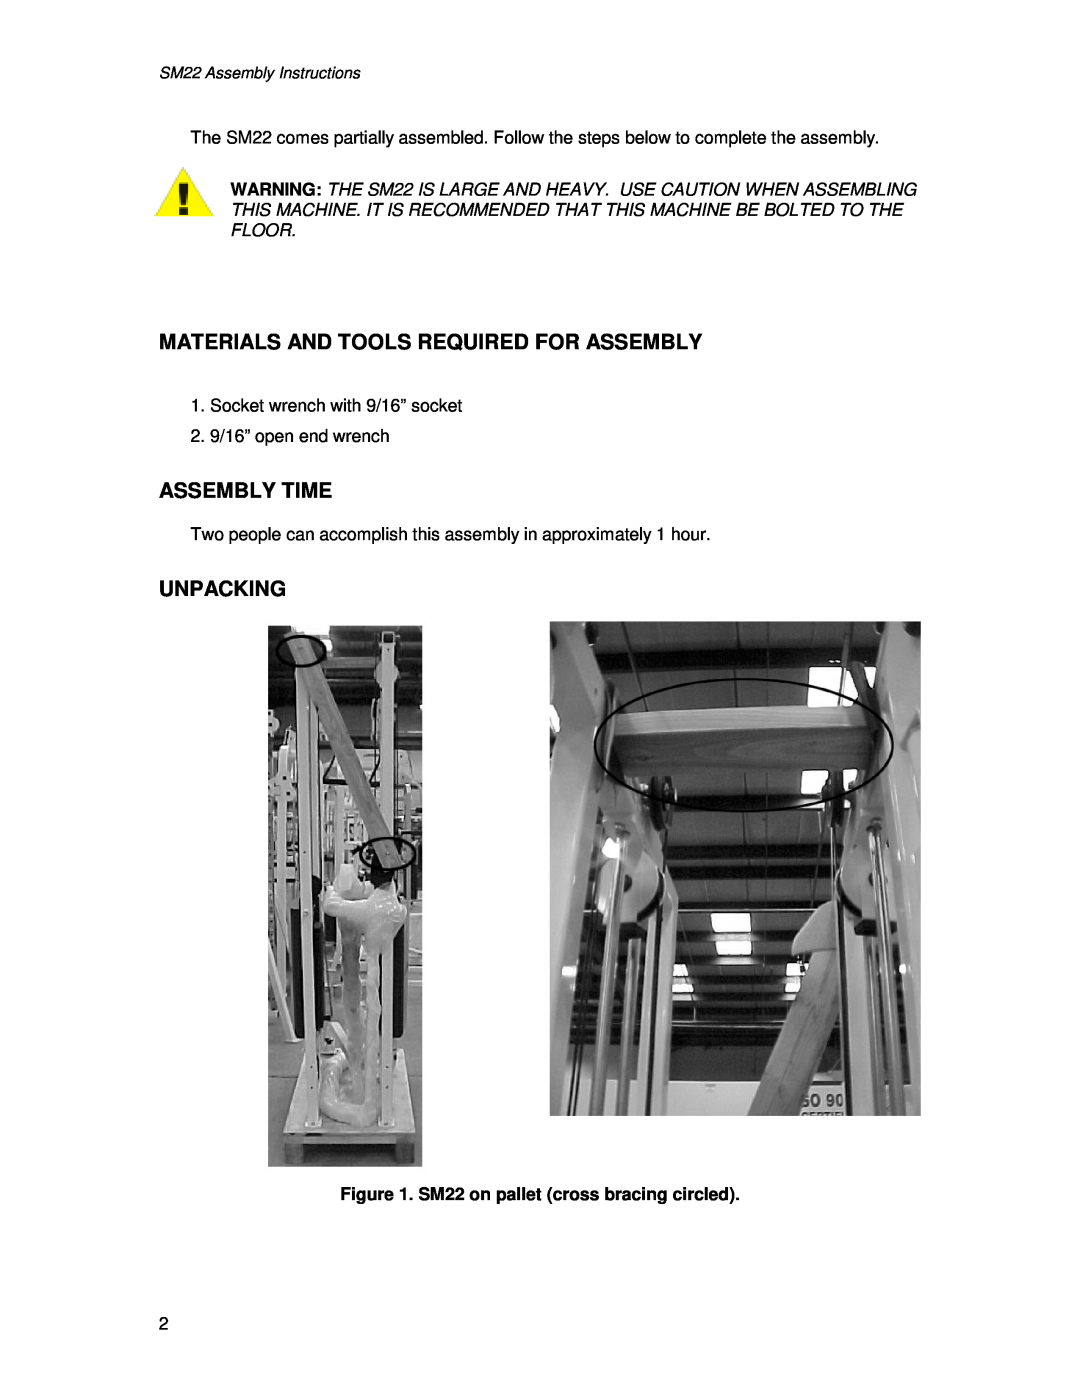 Life Fitness SM22 manual Materials And Tools Required For Assembly, Assembly Time, Unpacking 